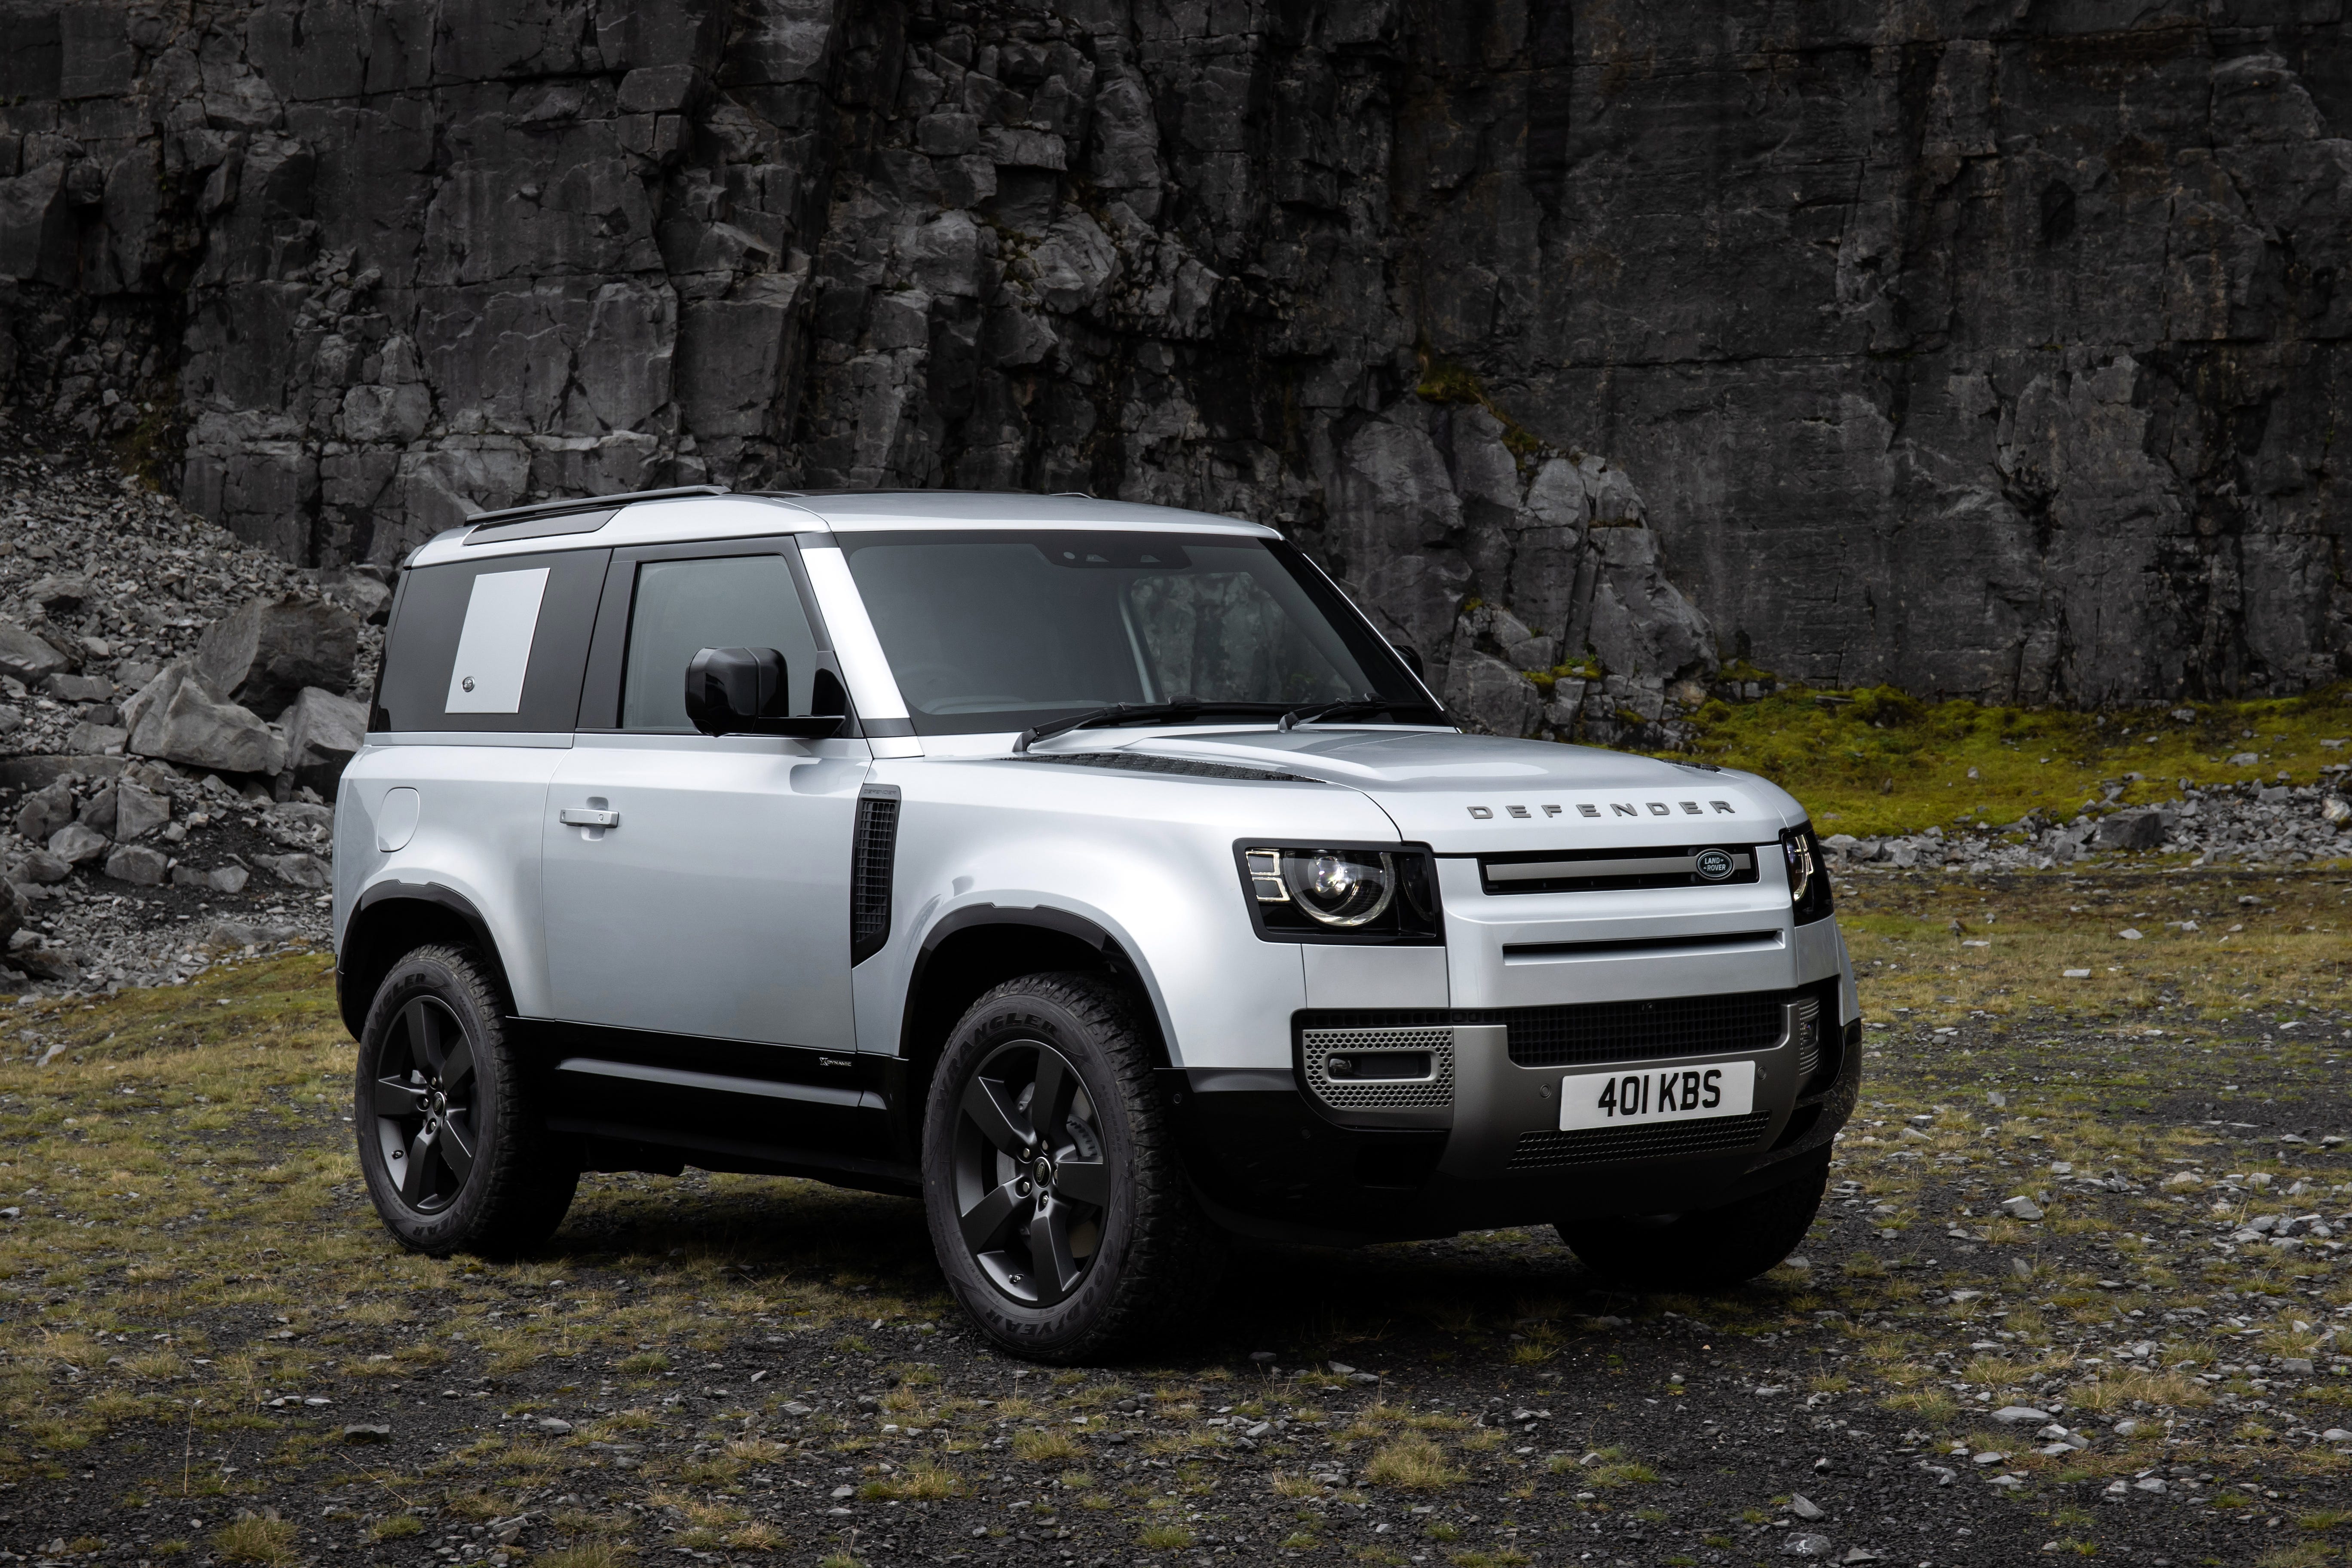 Stoel vergeven acuut Review: 2021 Land Rover Defender is a skillful update of a storied SUV